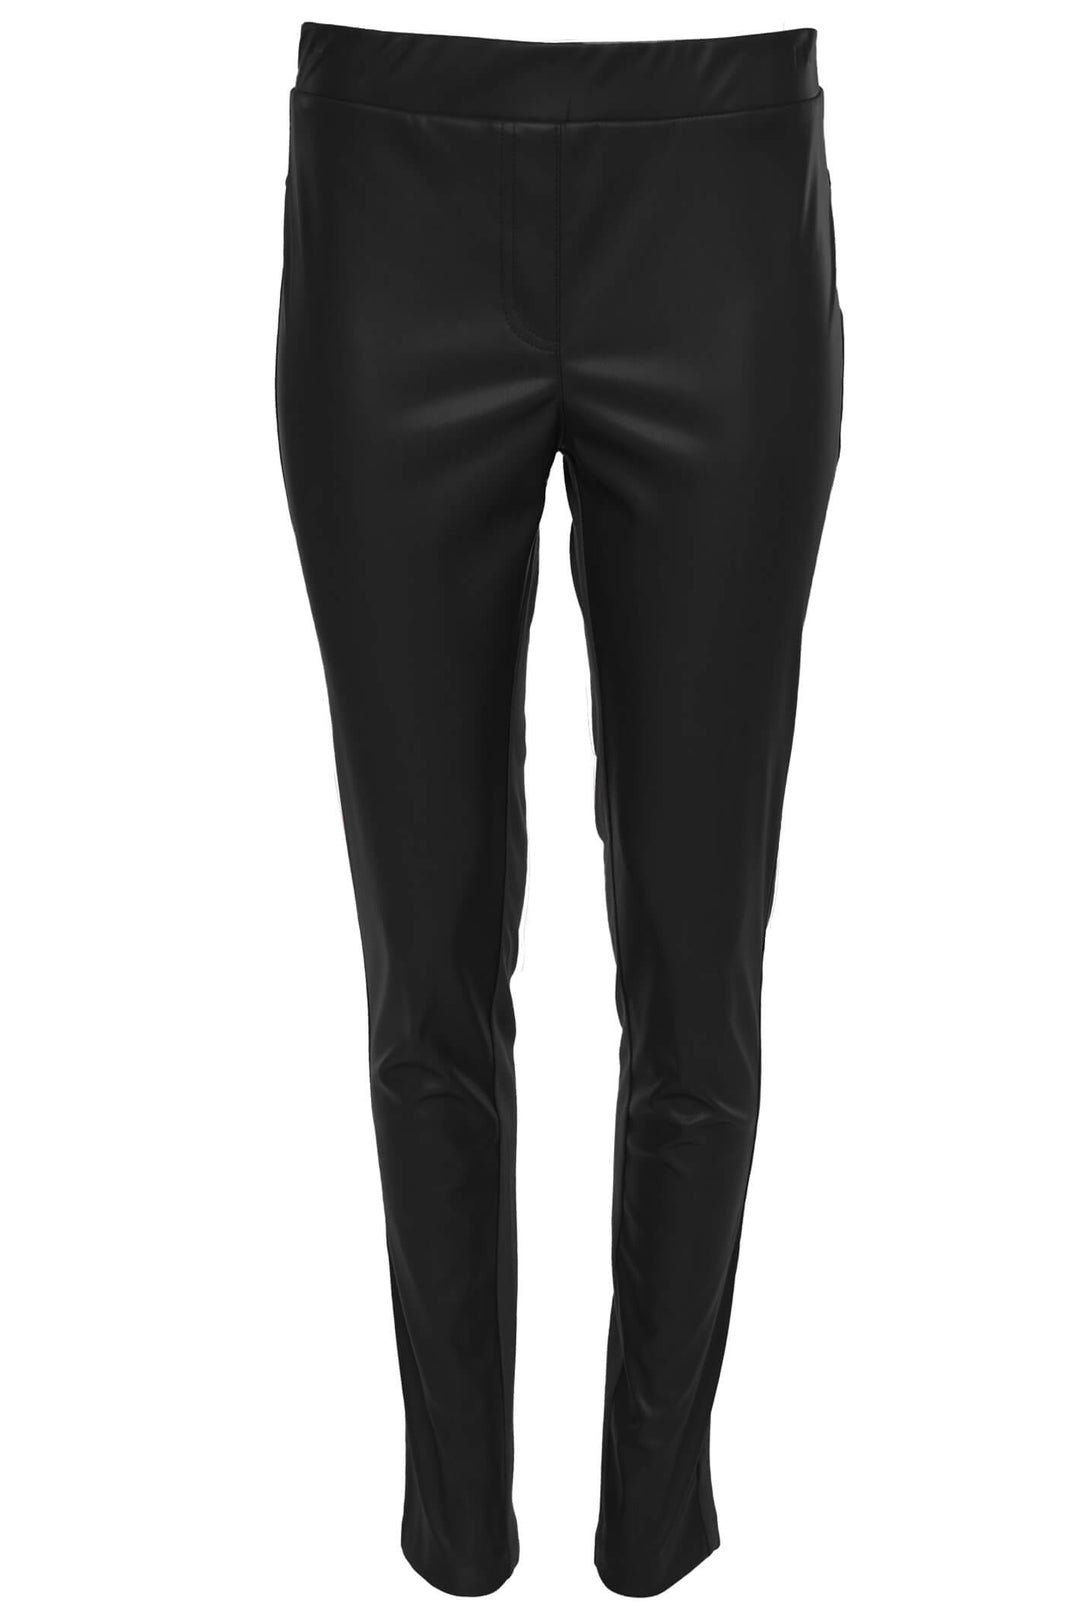 Naya NAW23 104 Black Faux Leather Jersey Legging Trousers - Experience Boutique